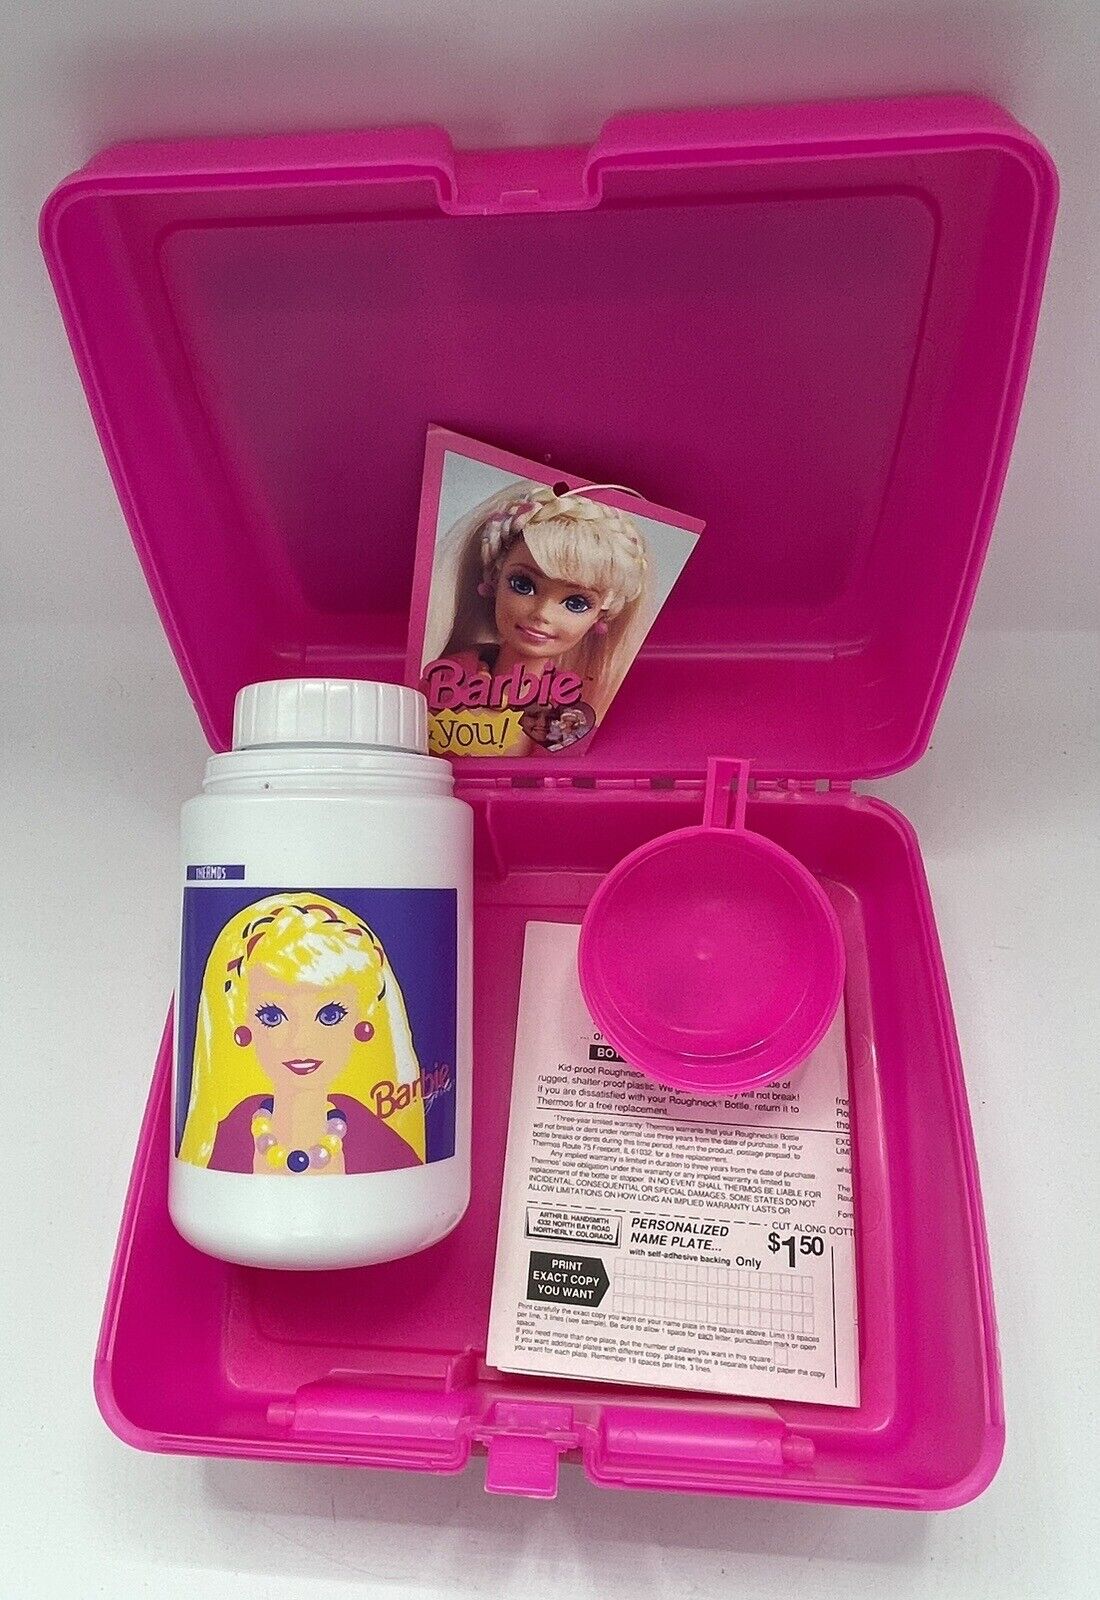 Vintage 1993 Mattel Barbie And You Lunchbox & Thermos NEW NeverUsed #04120510512